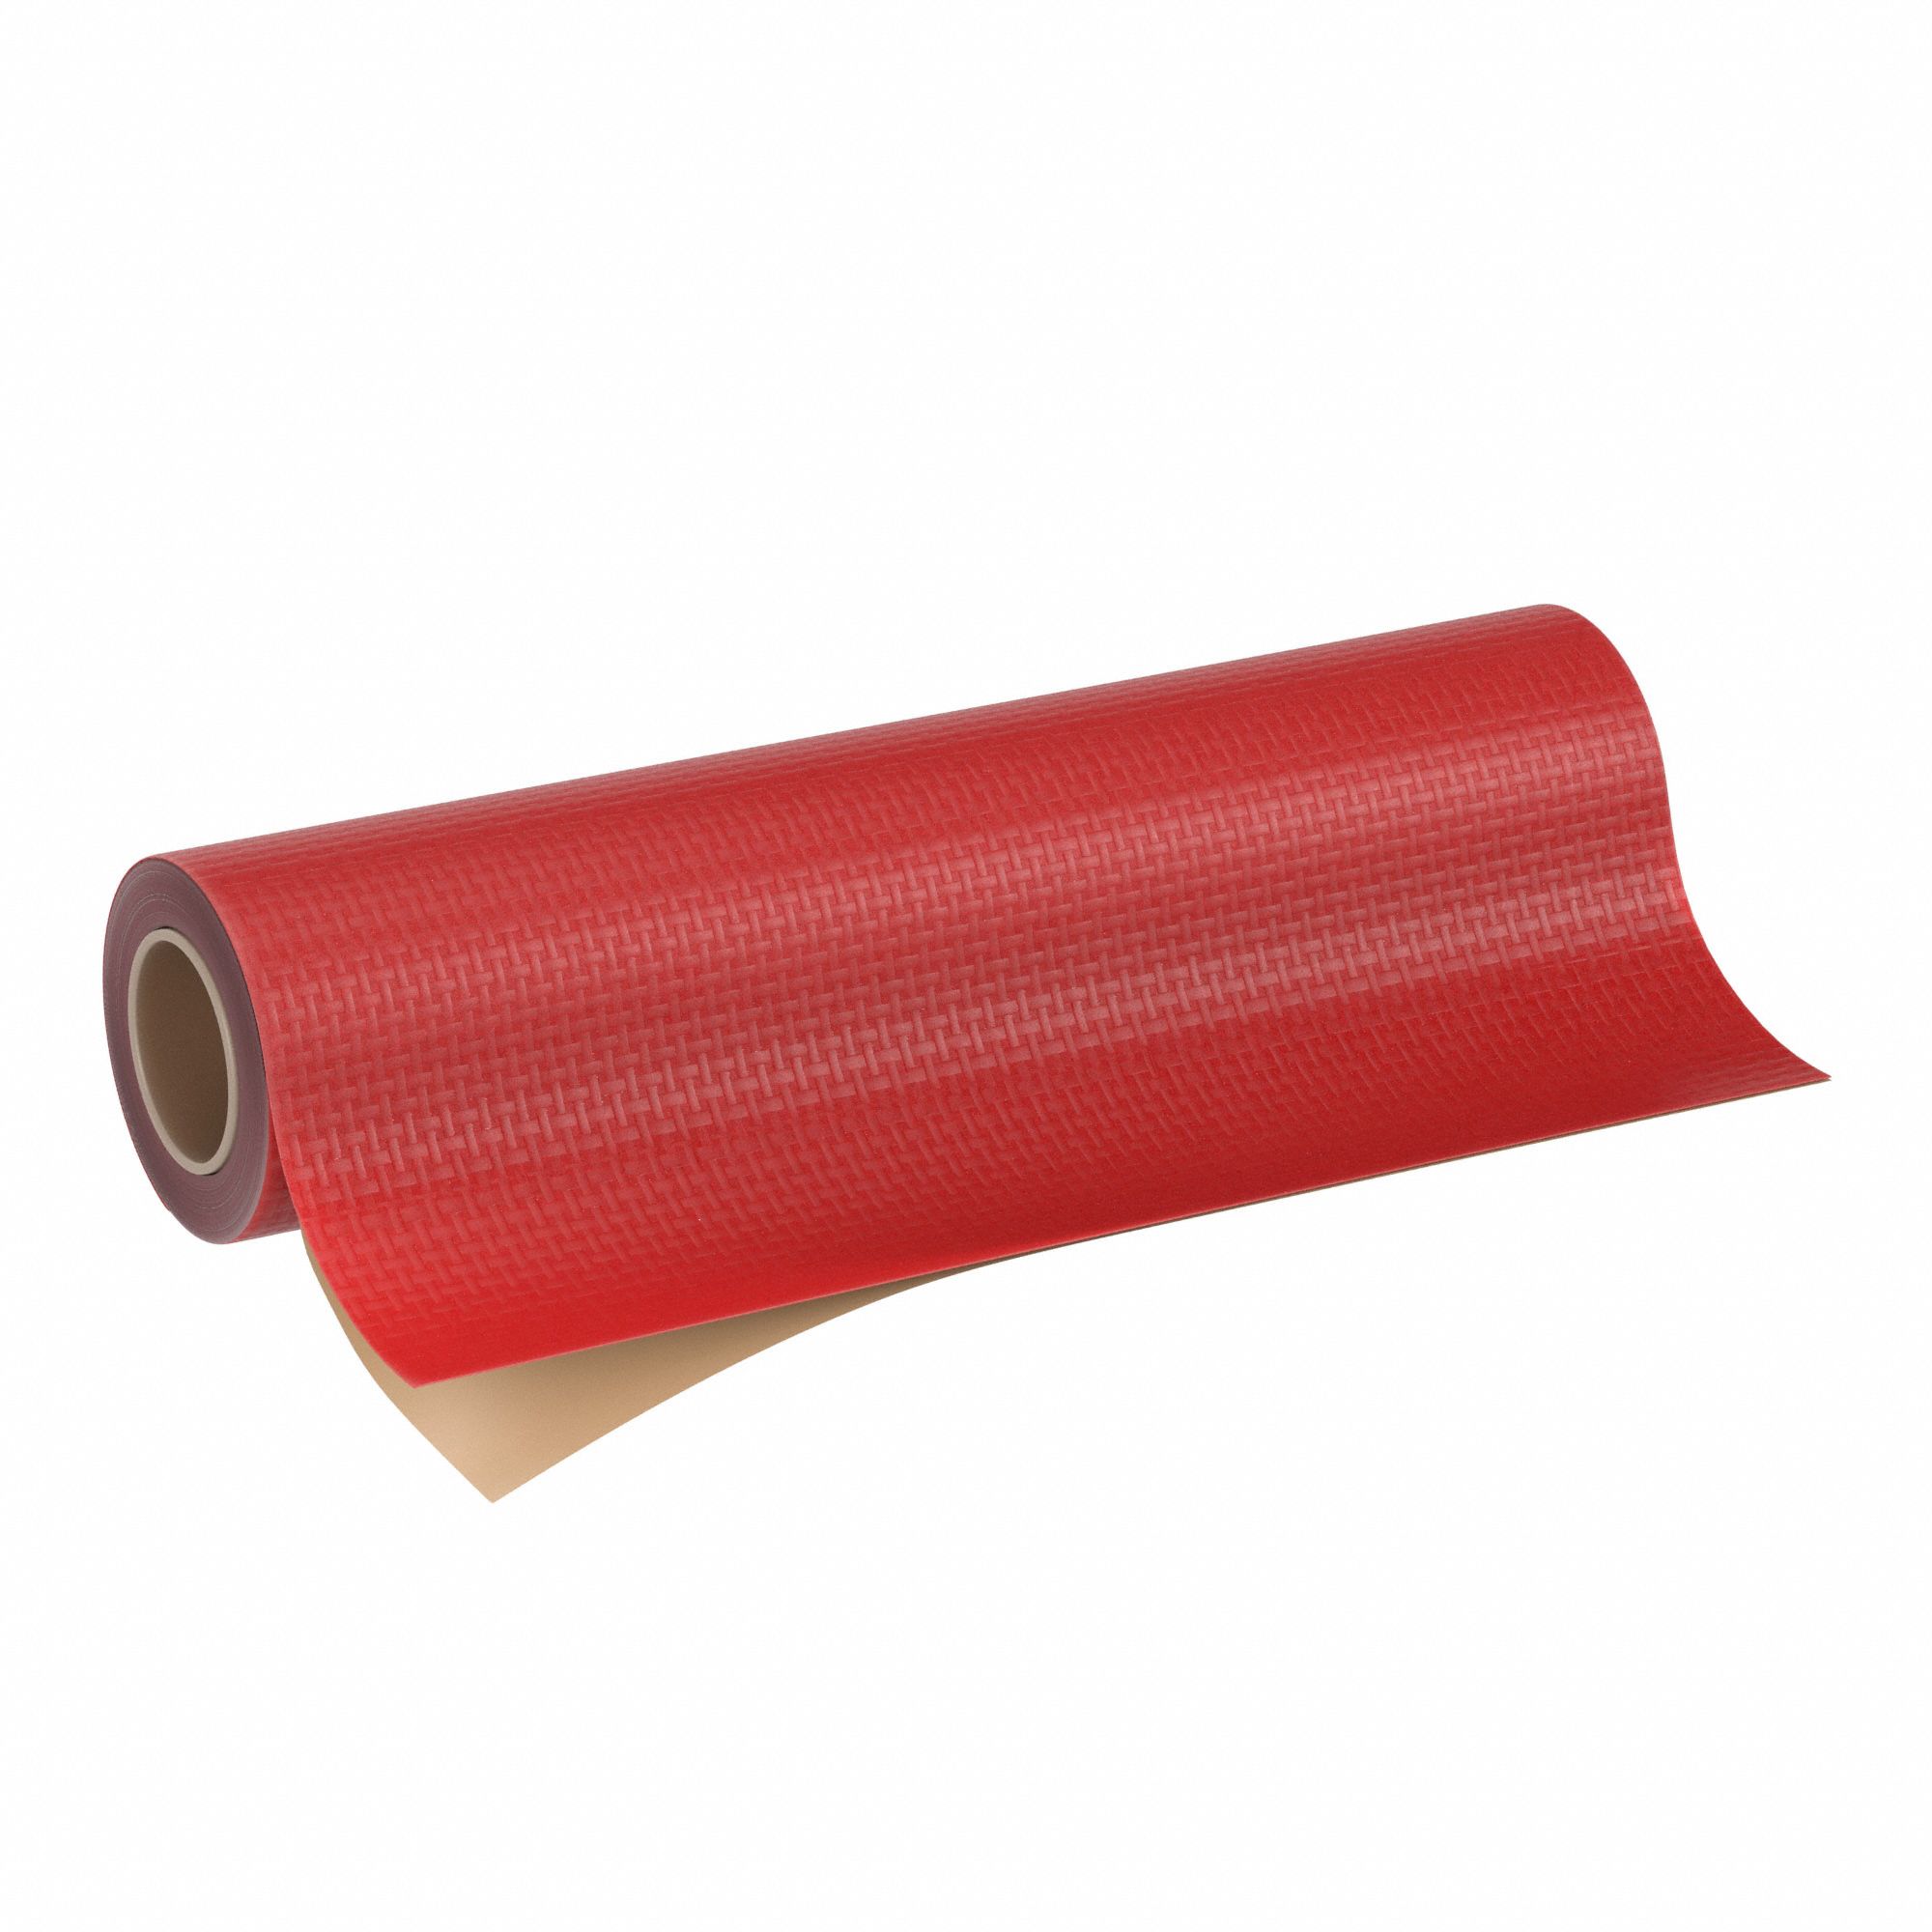 1/32 REINFORCED SILICONE RUBBER ROLL, FIBERGLASS INSERT – American  Material Supply